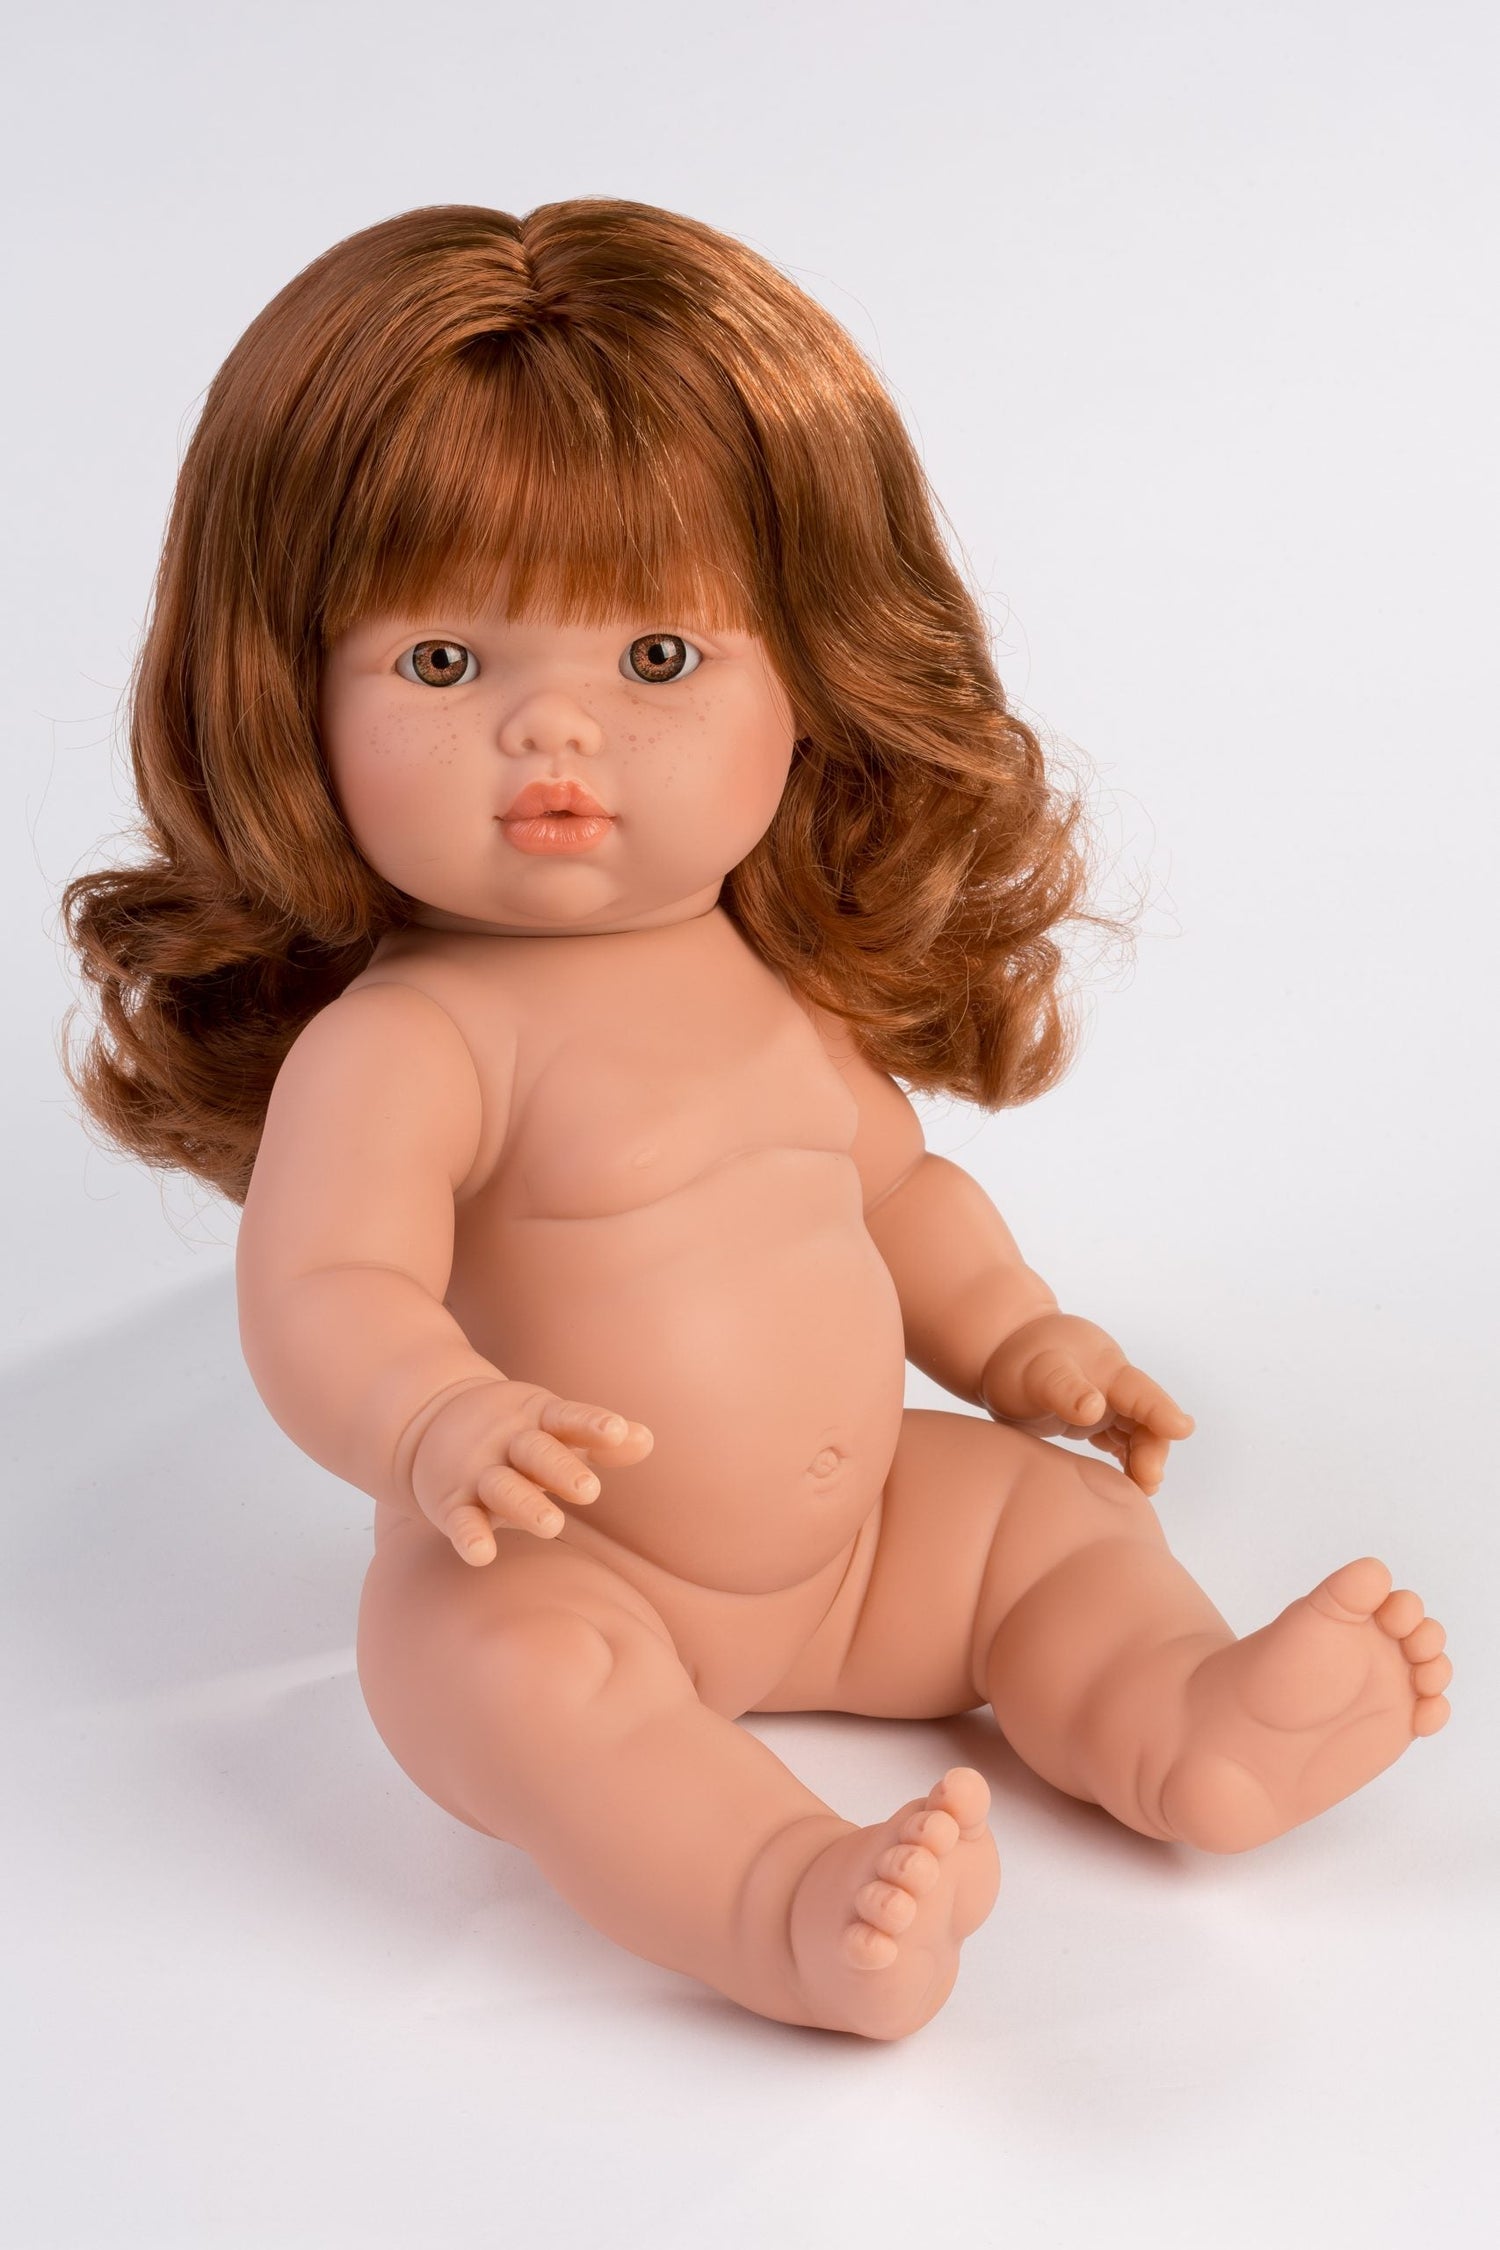 LLORENS DOLLS | MINI COLETTOS DOLL - SOPHIA *PRE-ORDER* by LLORENS DOLLS - The Playful Collective